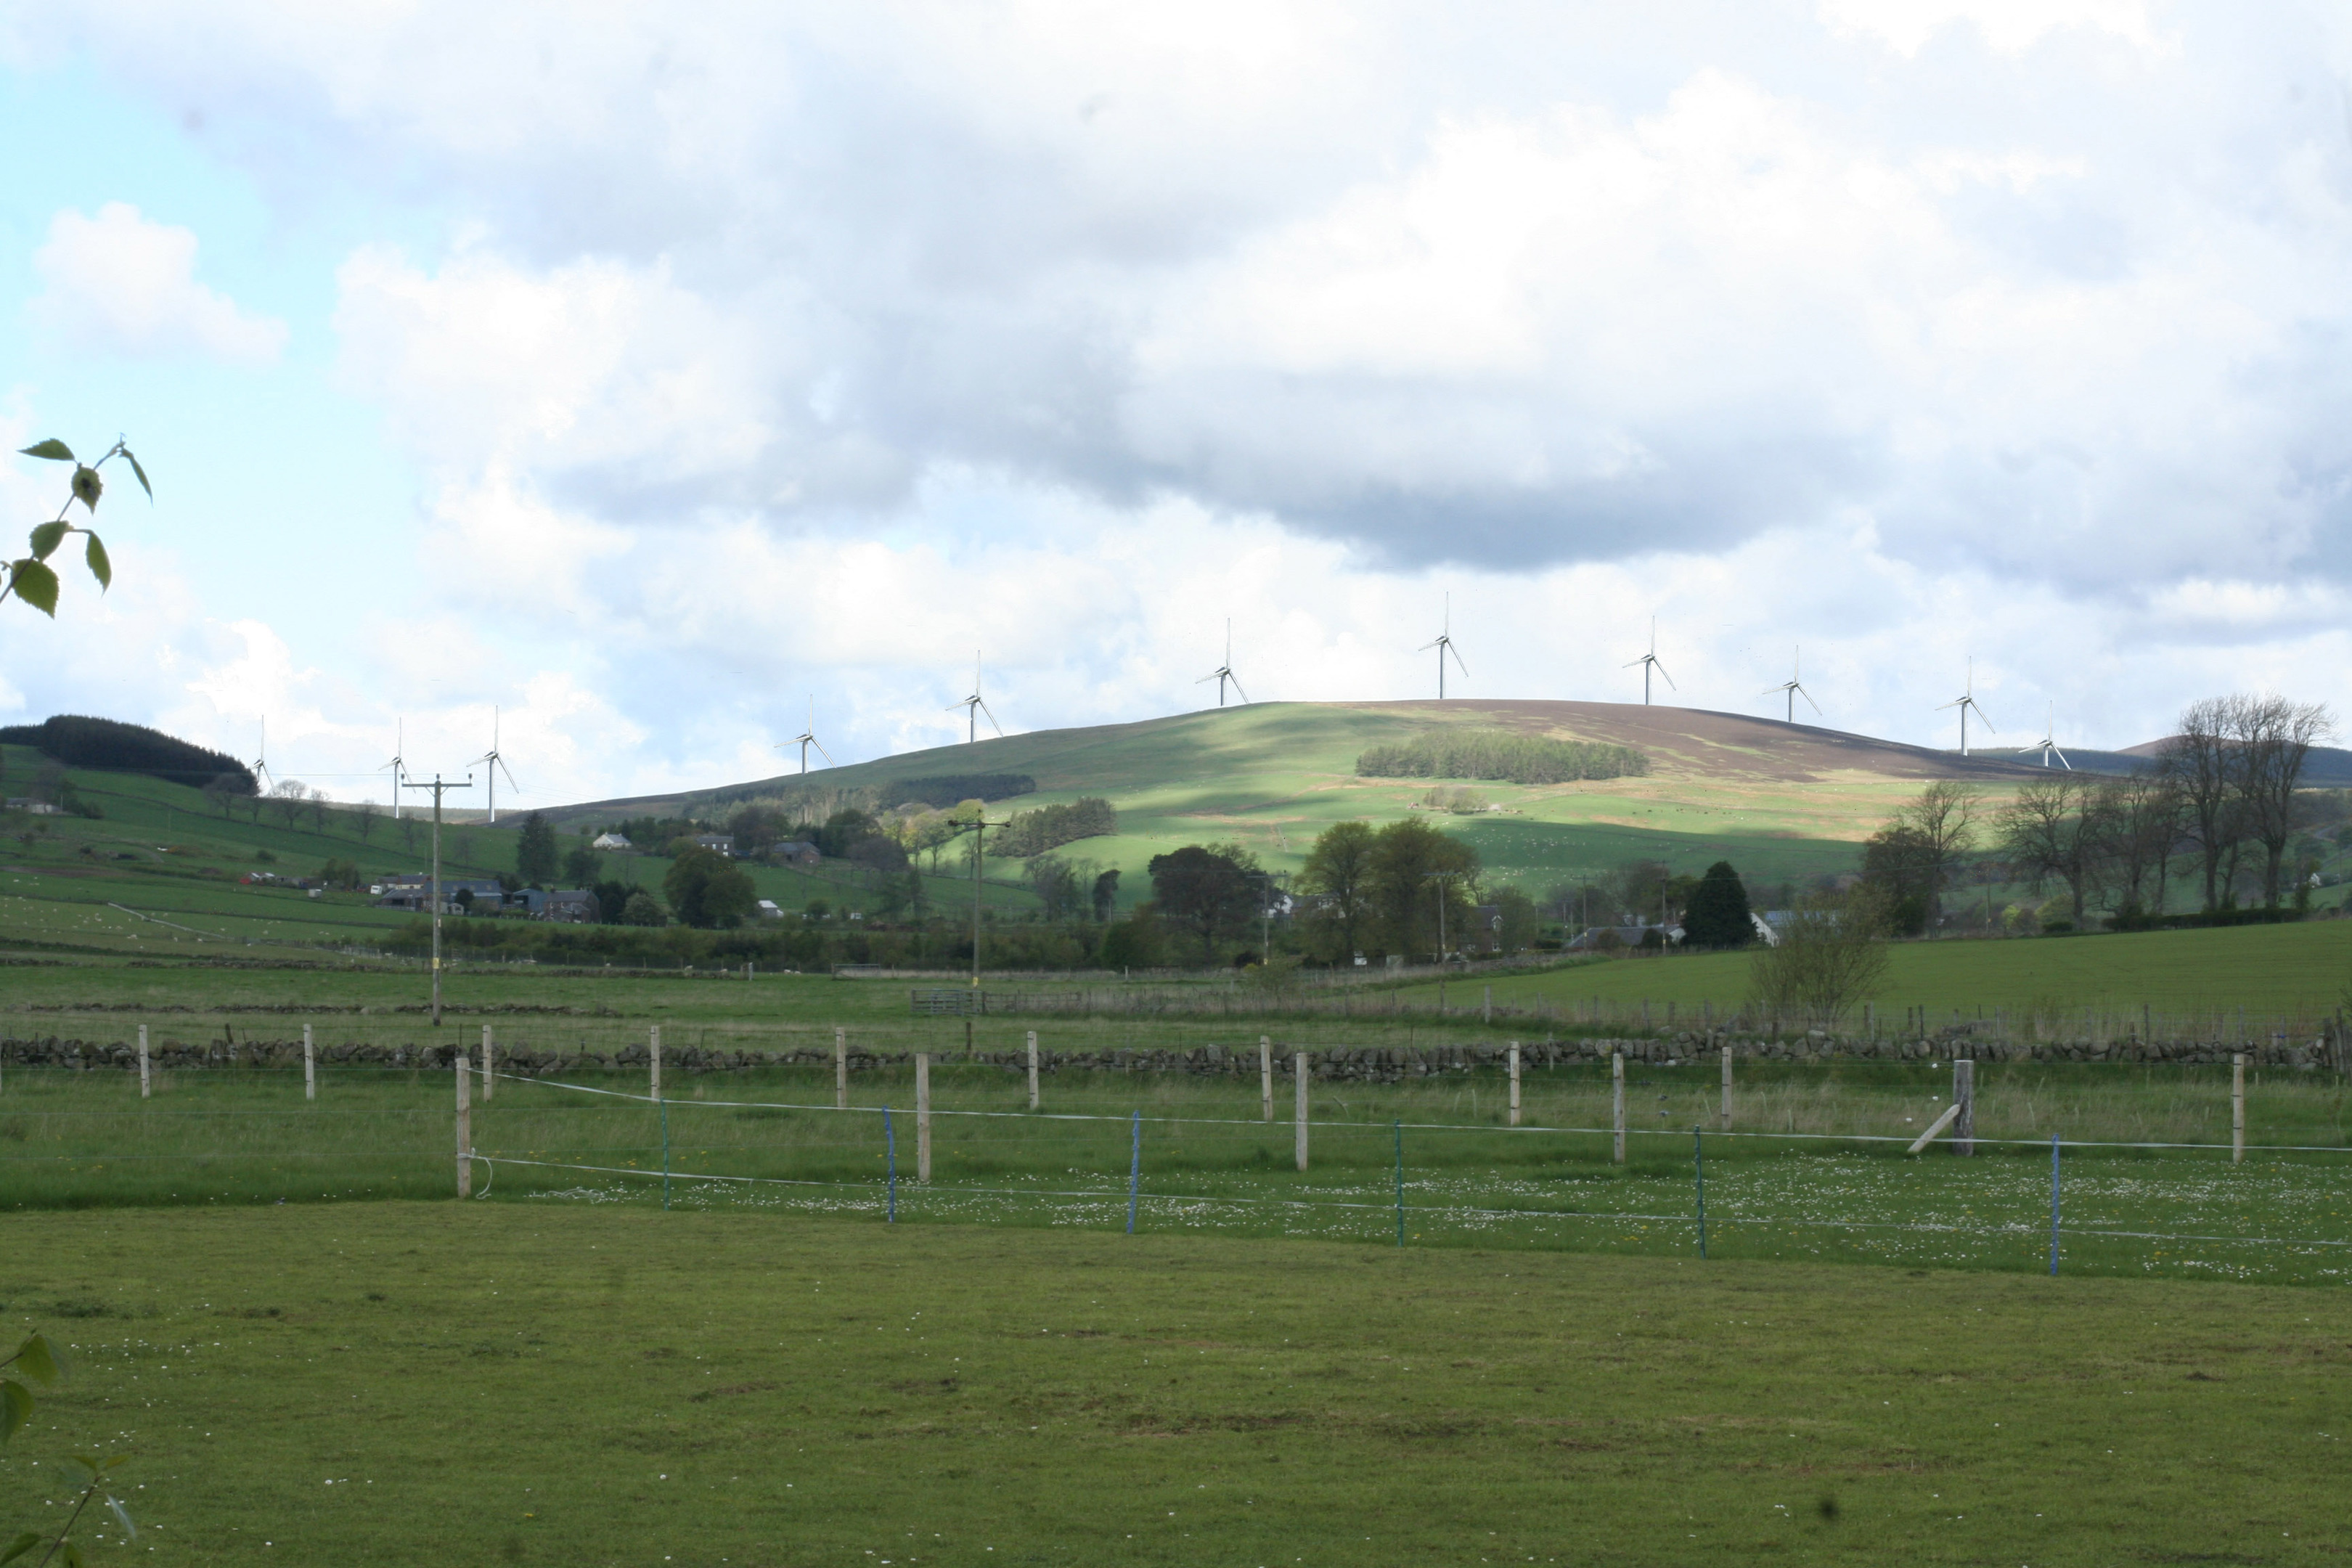 An artist's impression of how Saddlehill windfarm would look.